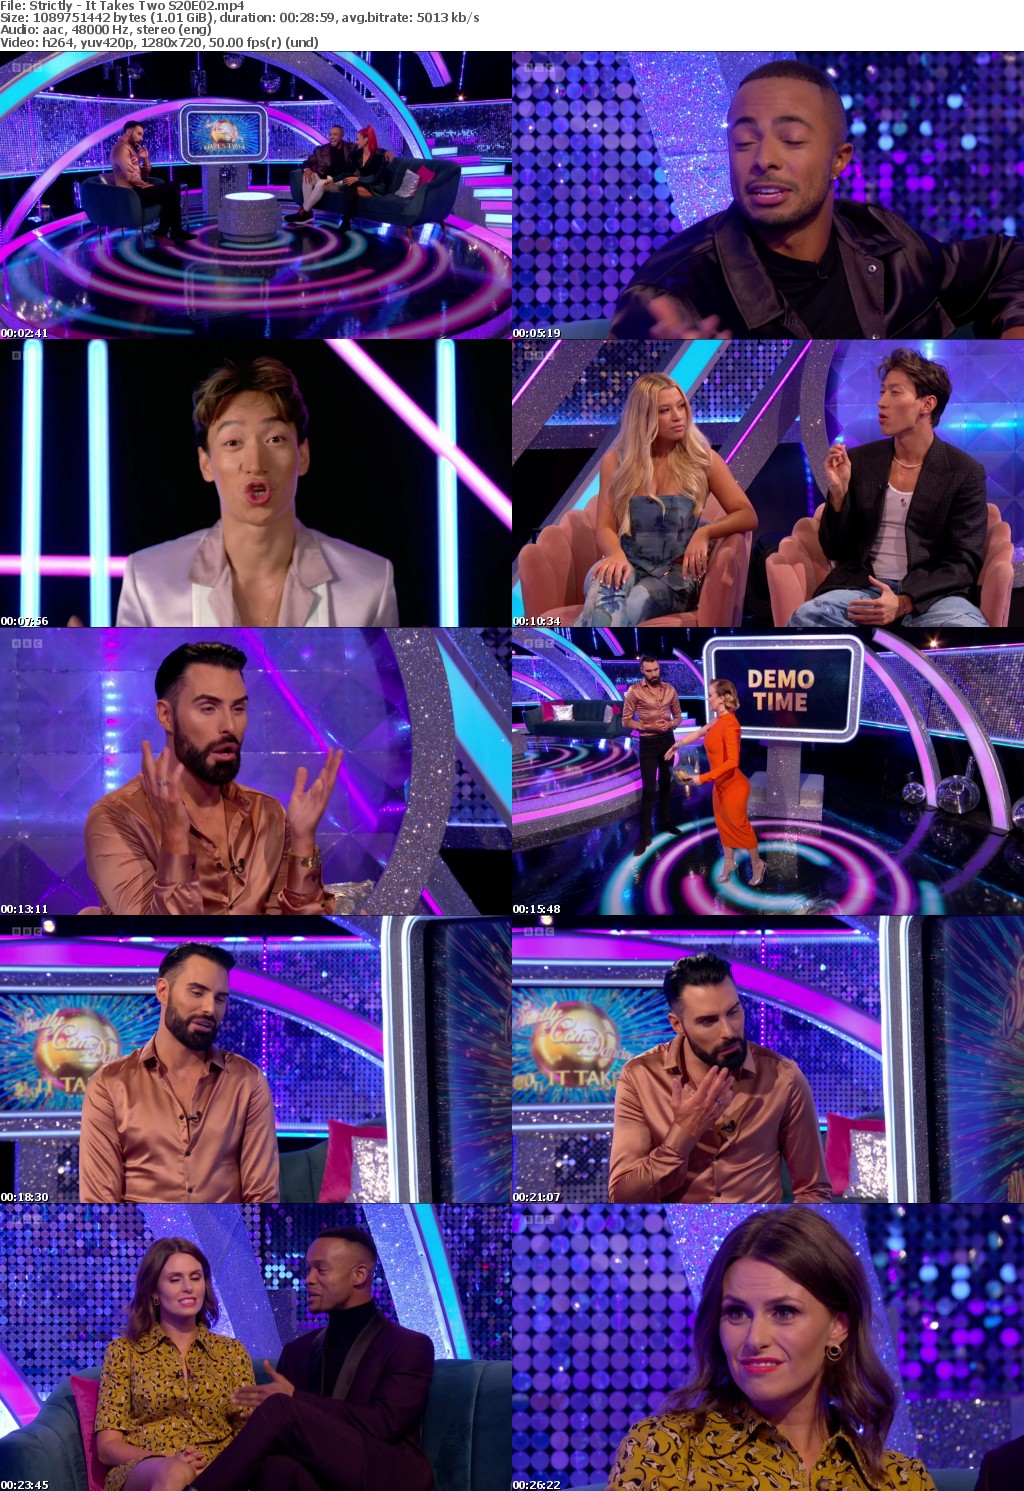 Strictly - It Takes Two S20E02 (1280x720p HD, 50fps, soft Eng subs)